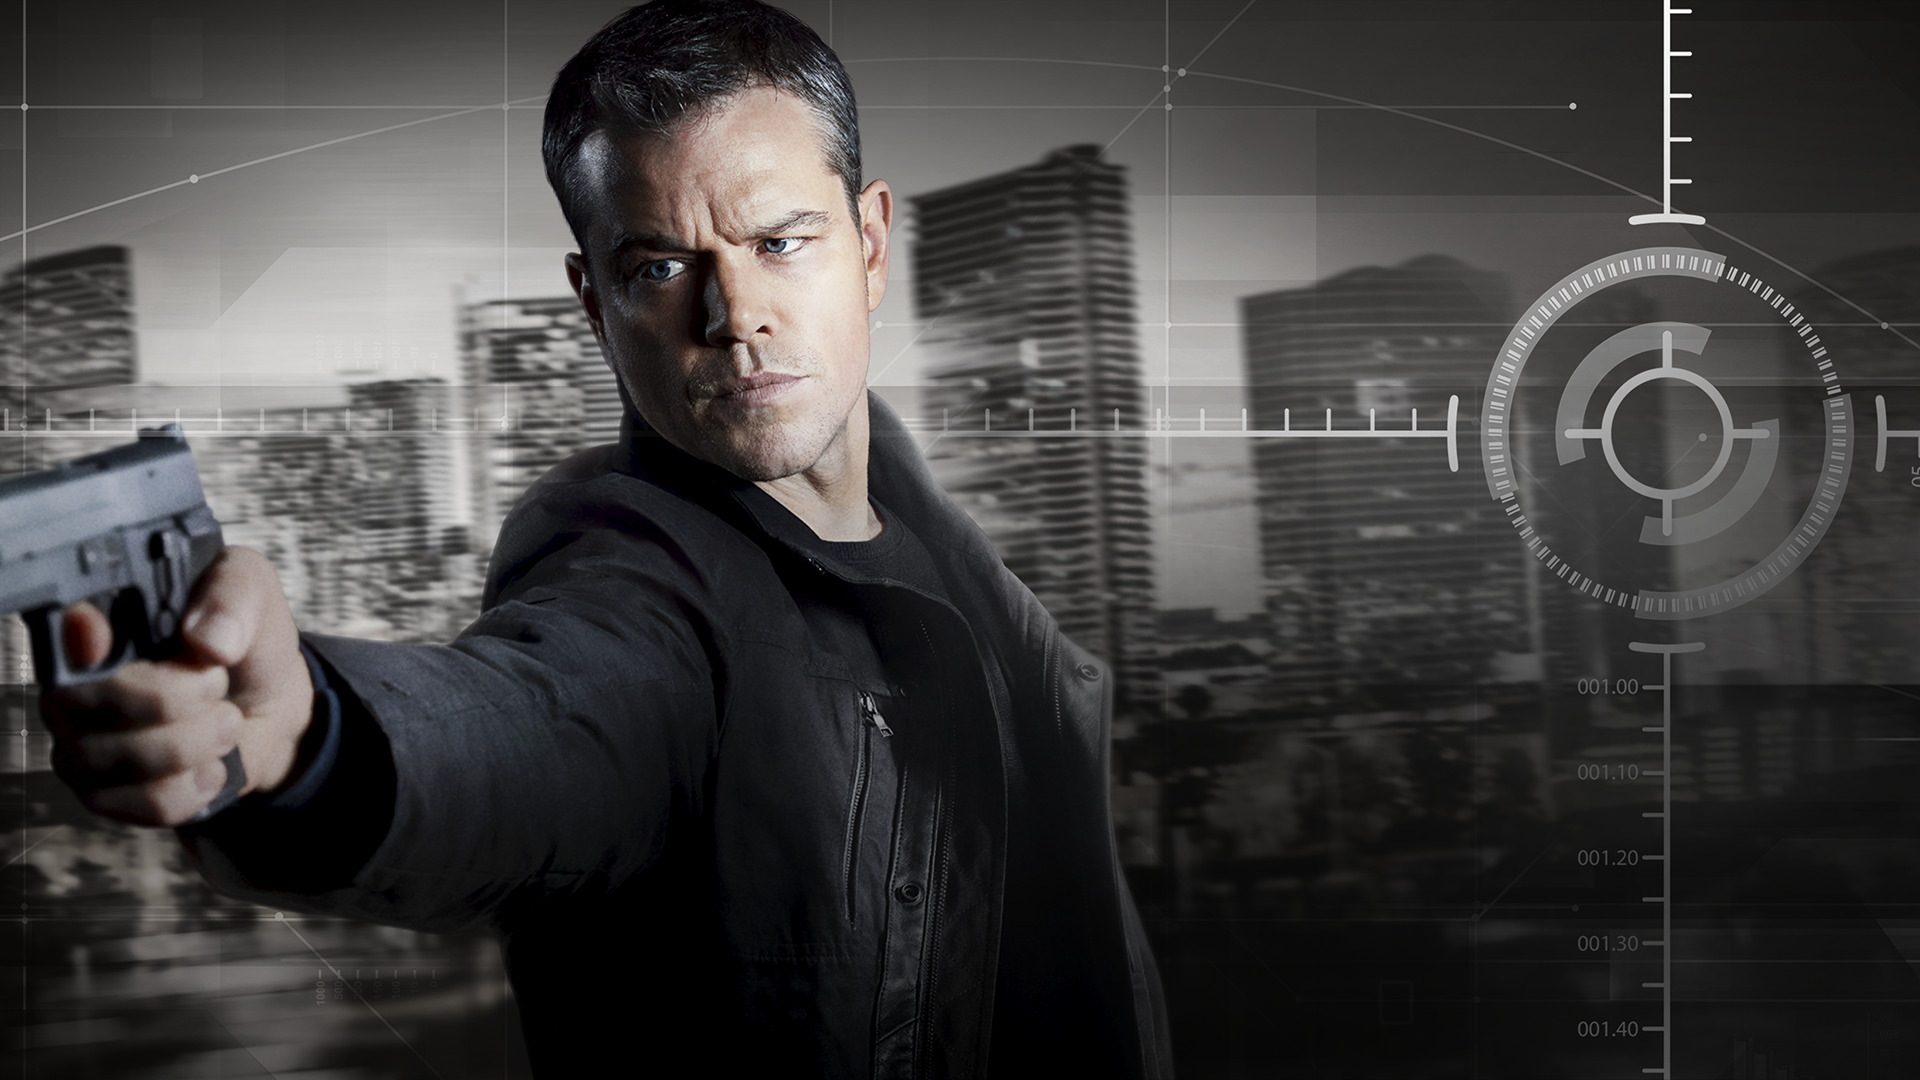 jason bourne wallpaper,action film,photography,movie,fictional character,flash photography